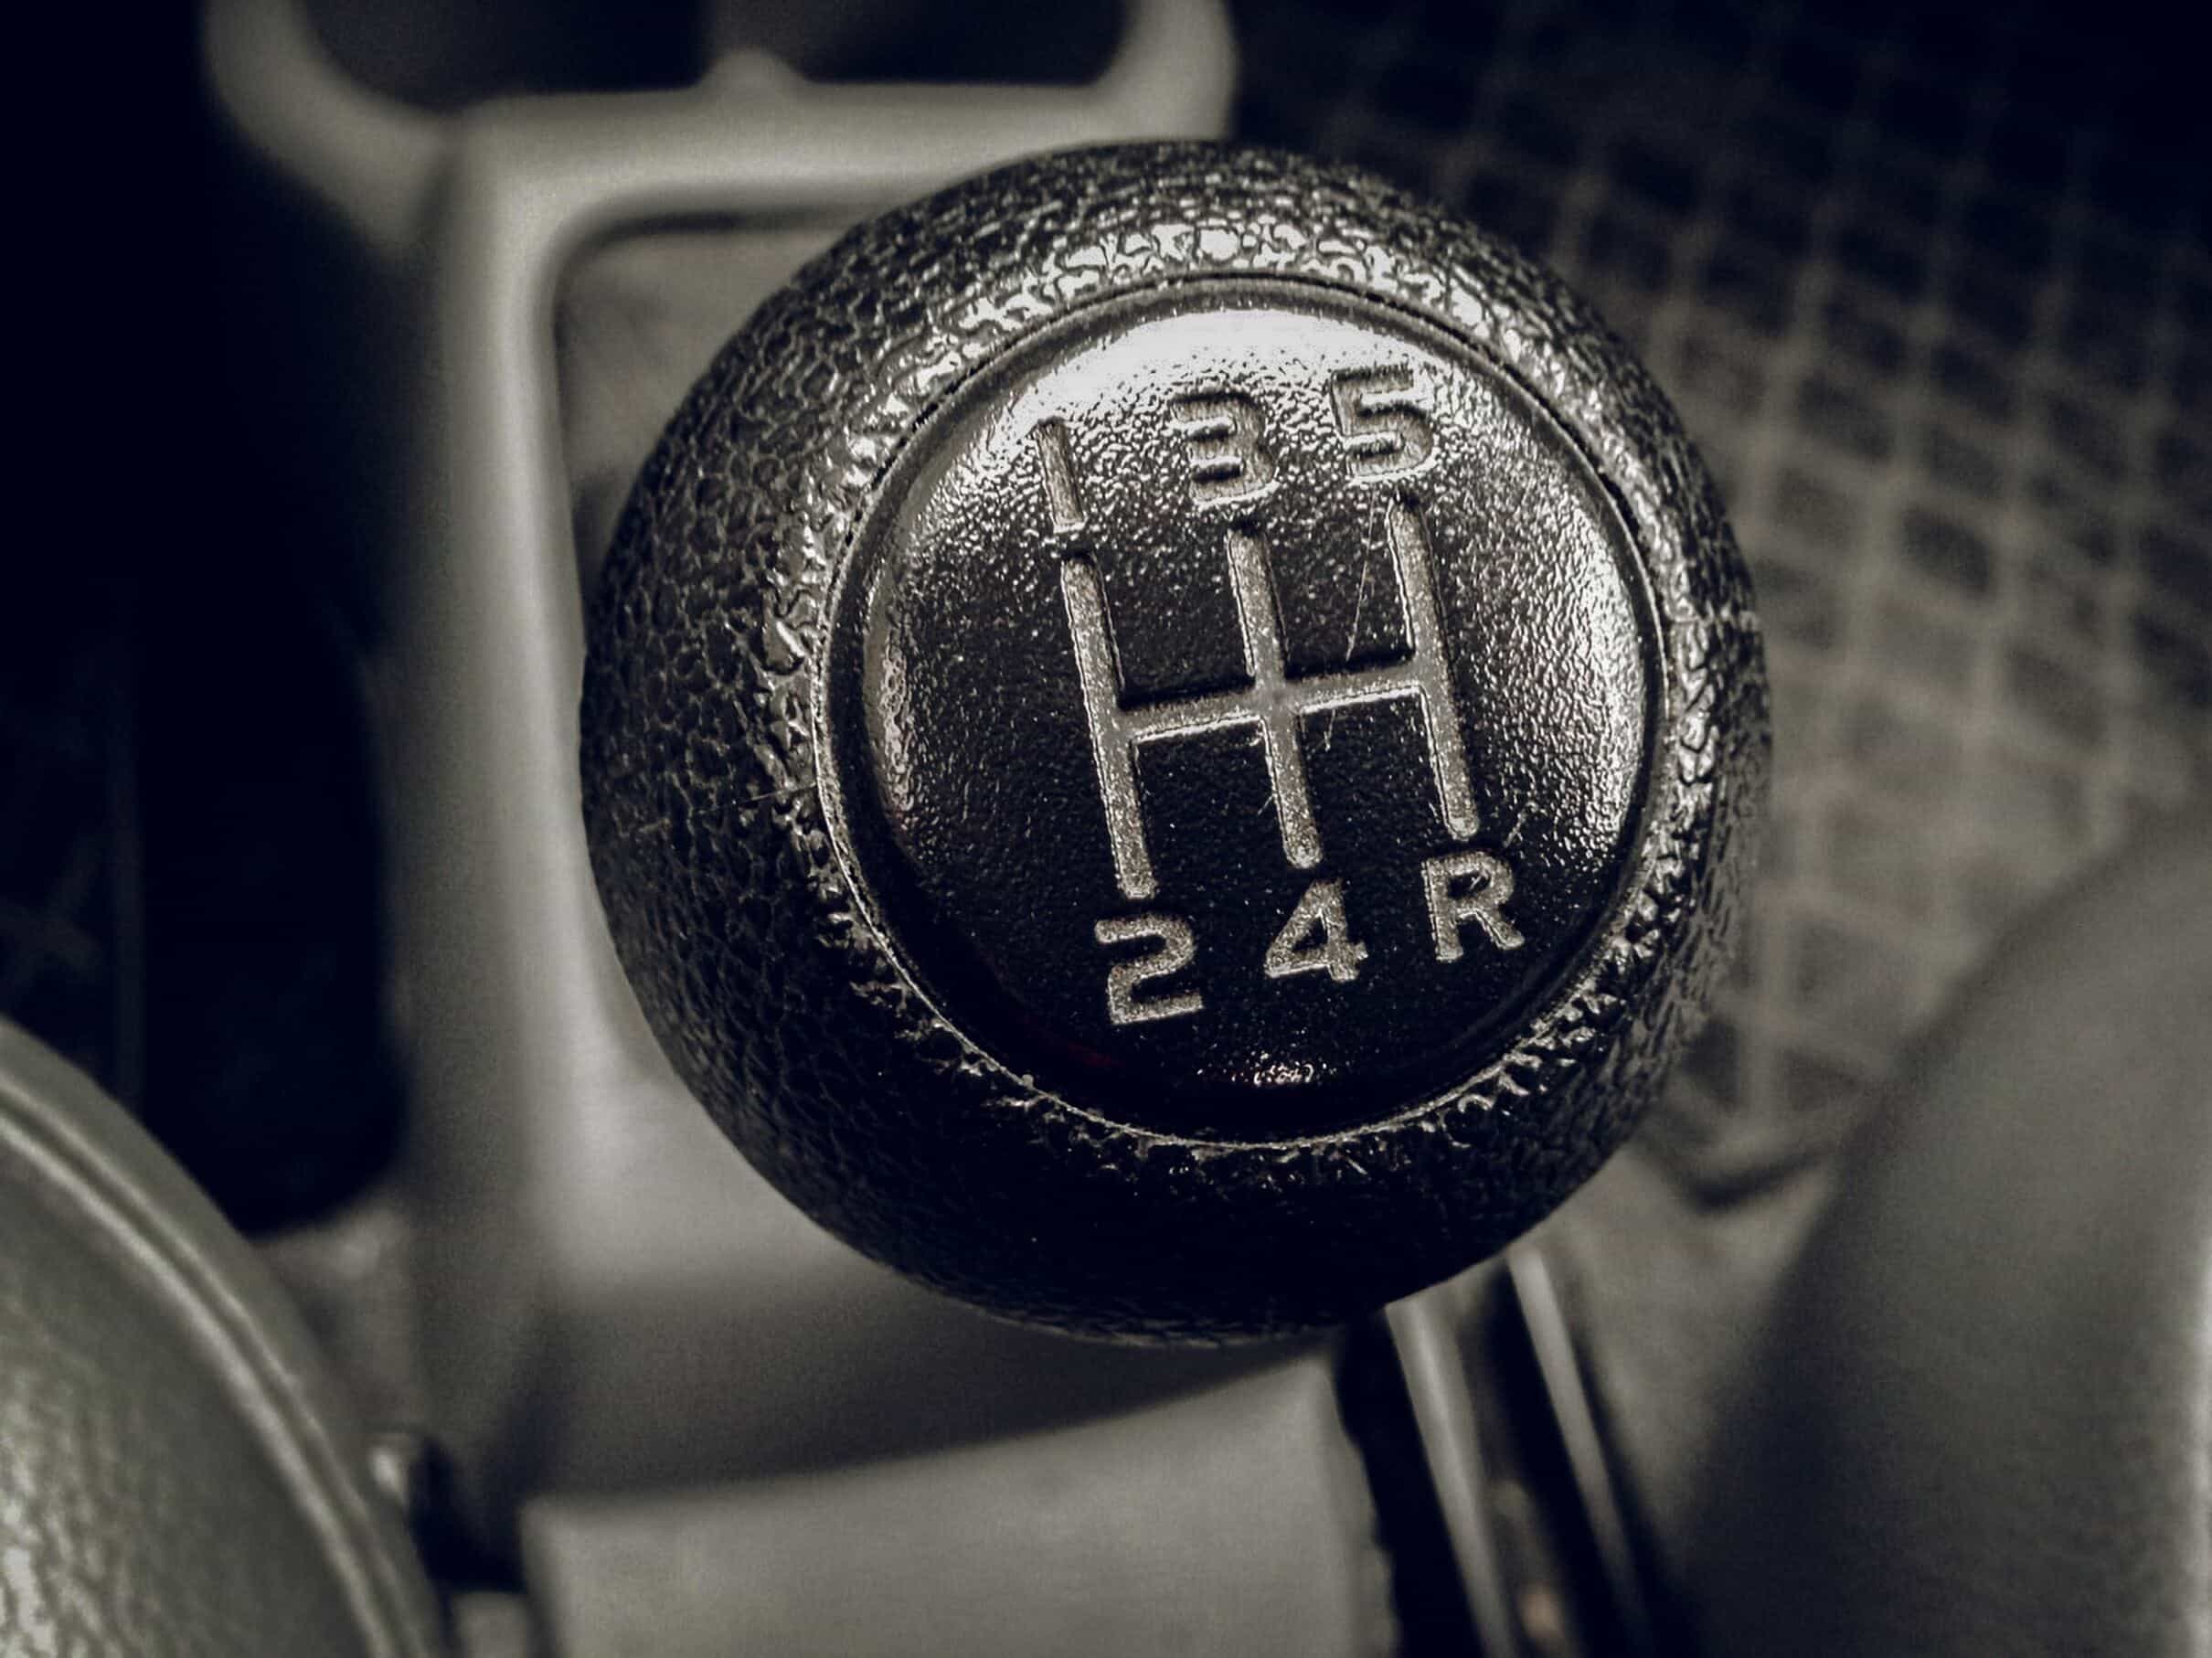 Close-up of a Manual Gearbox - A detailed view of a manual gearbox with visible gears and shift pattern.